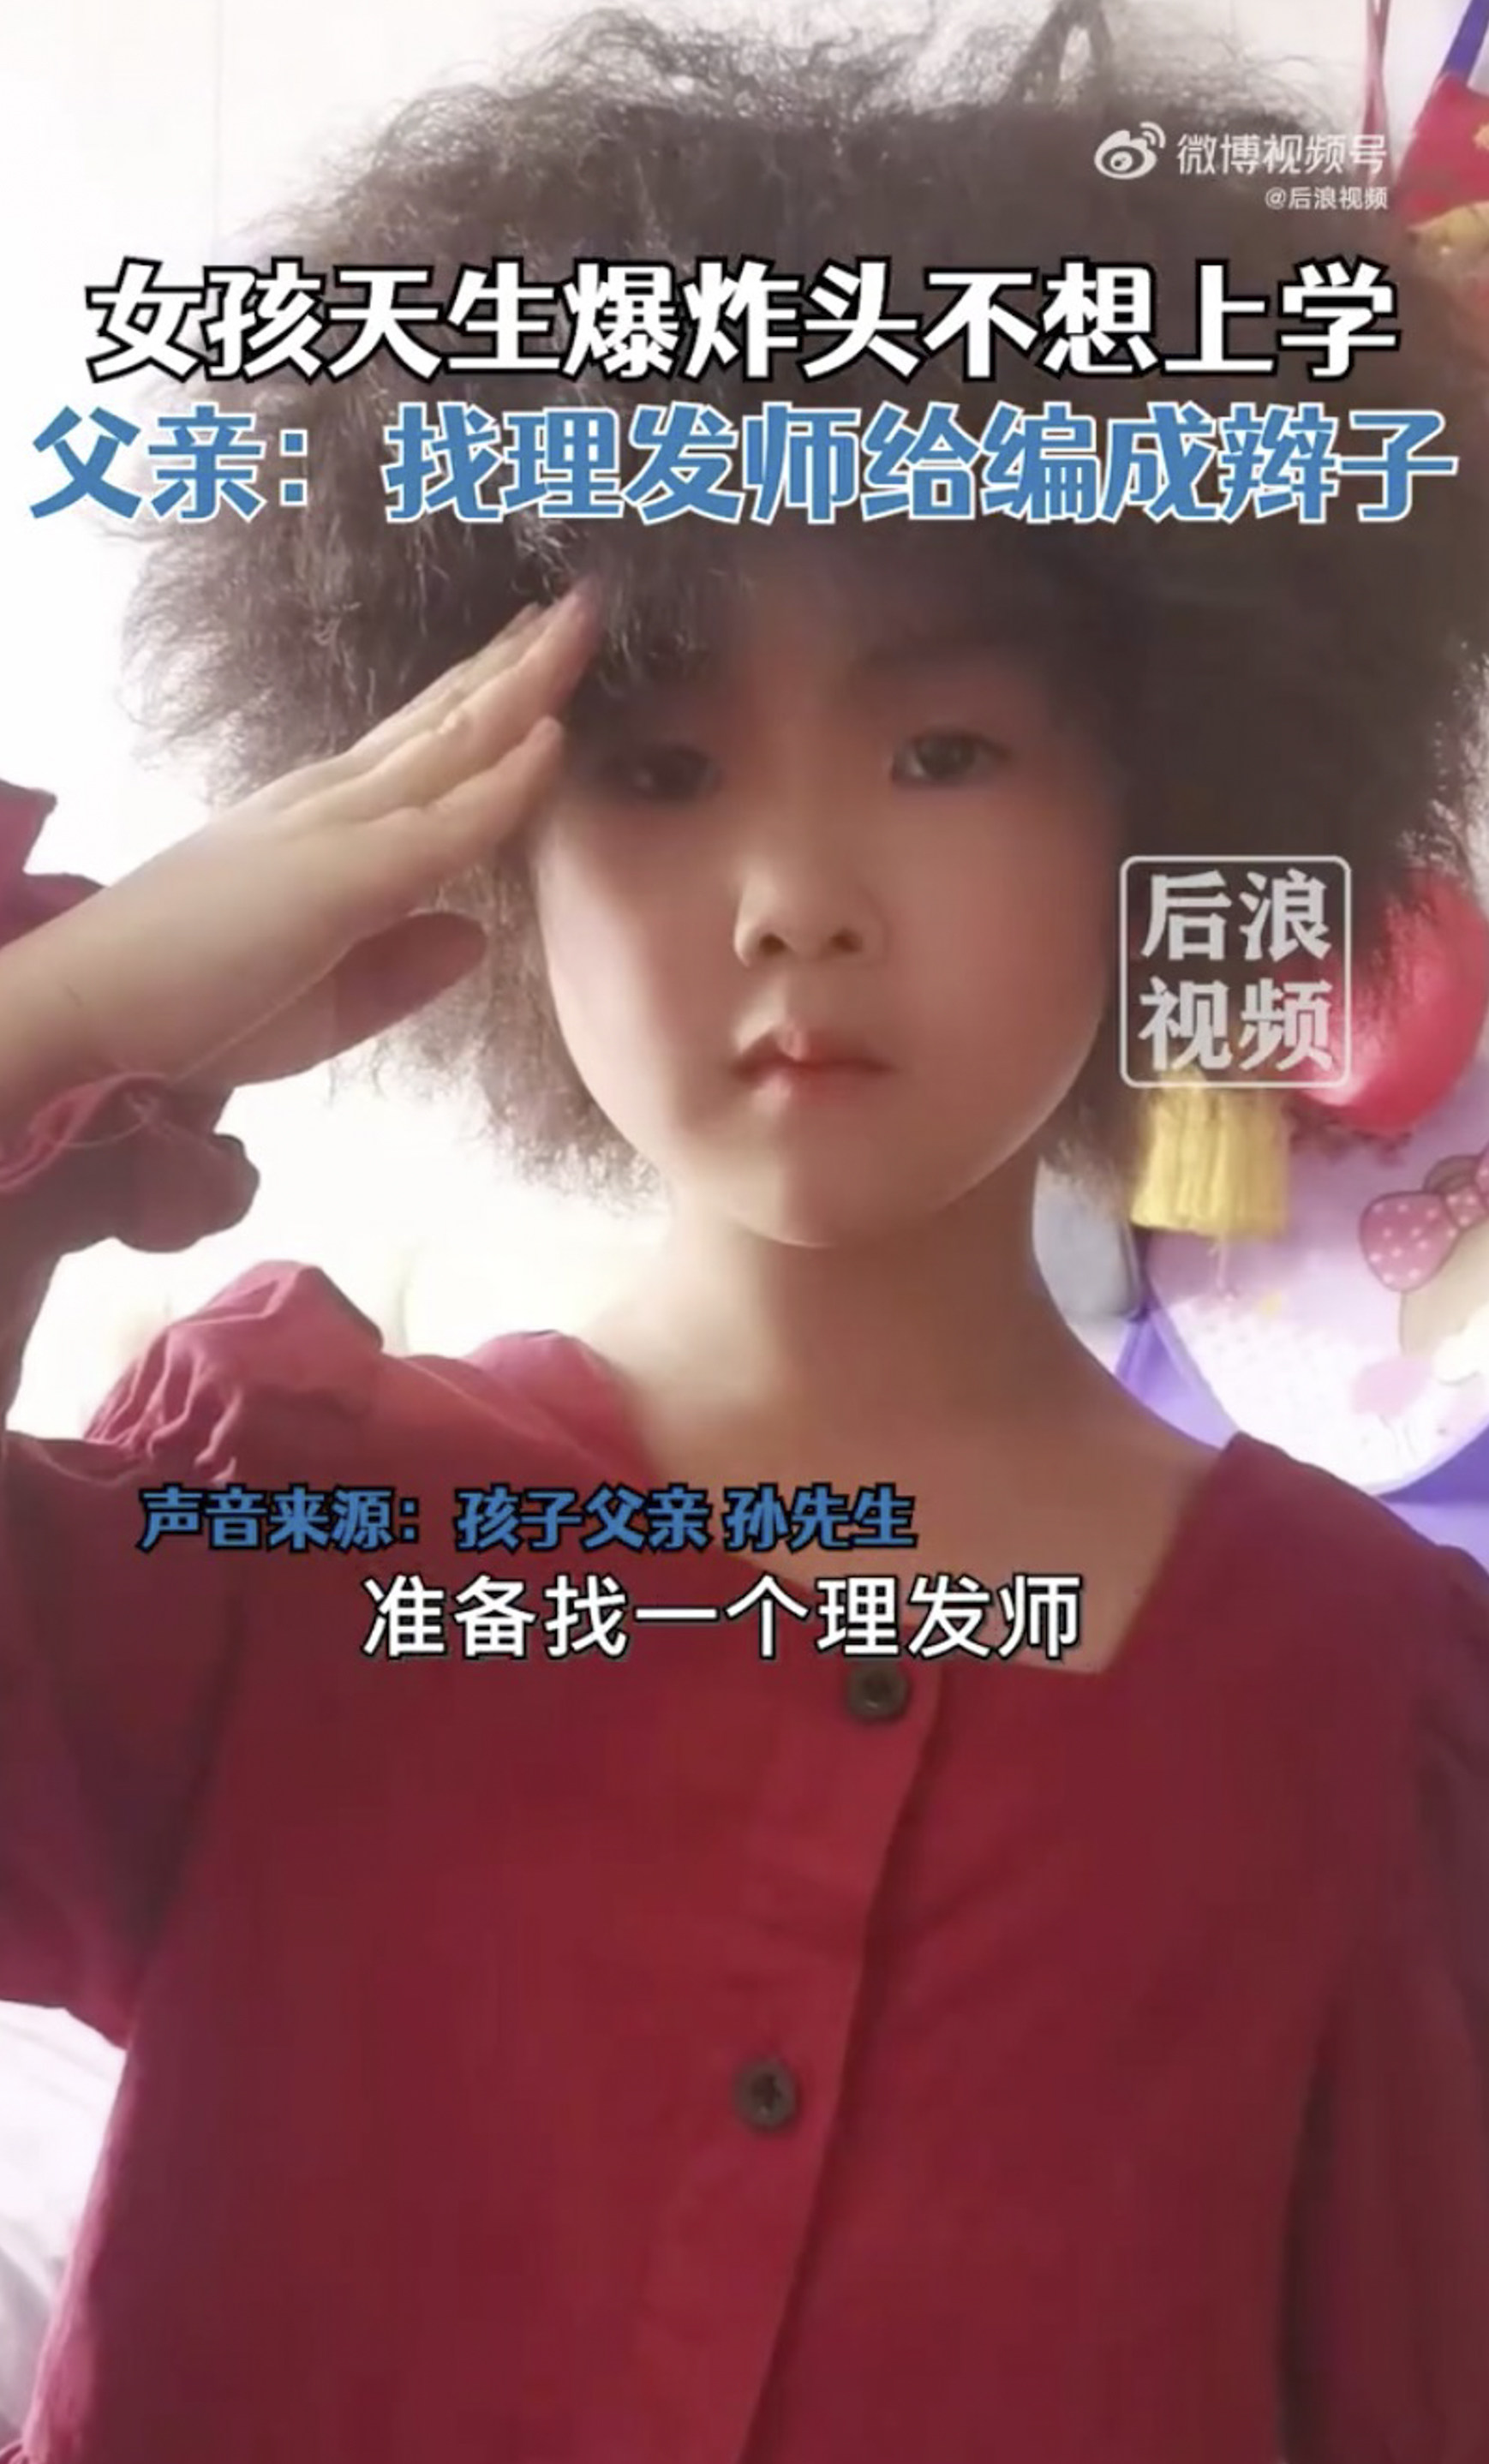 Despite her classmate’s reaction to her hair, Sun has been praised for her unique hair by many Chinese social media users. Photo: Weibo